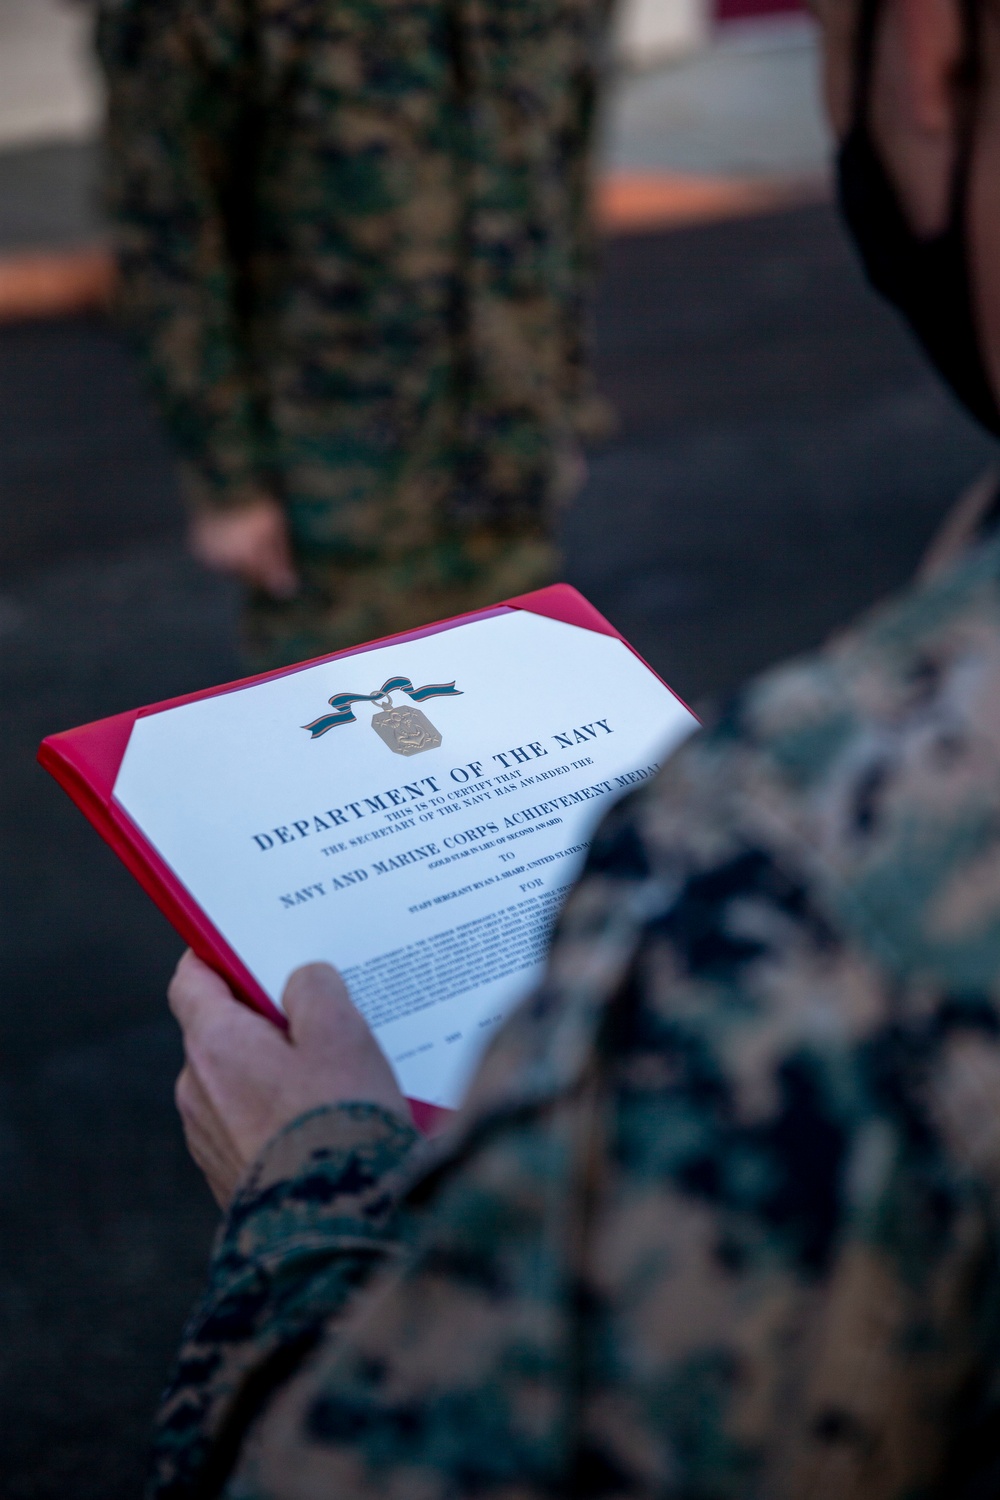 Marine awarded for lifesaving actions after Valley Center plane crash